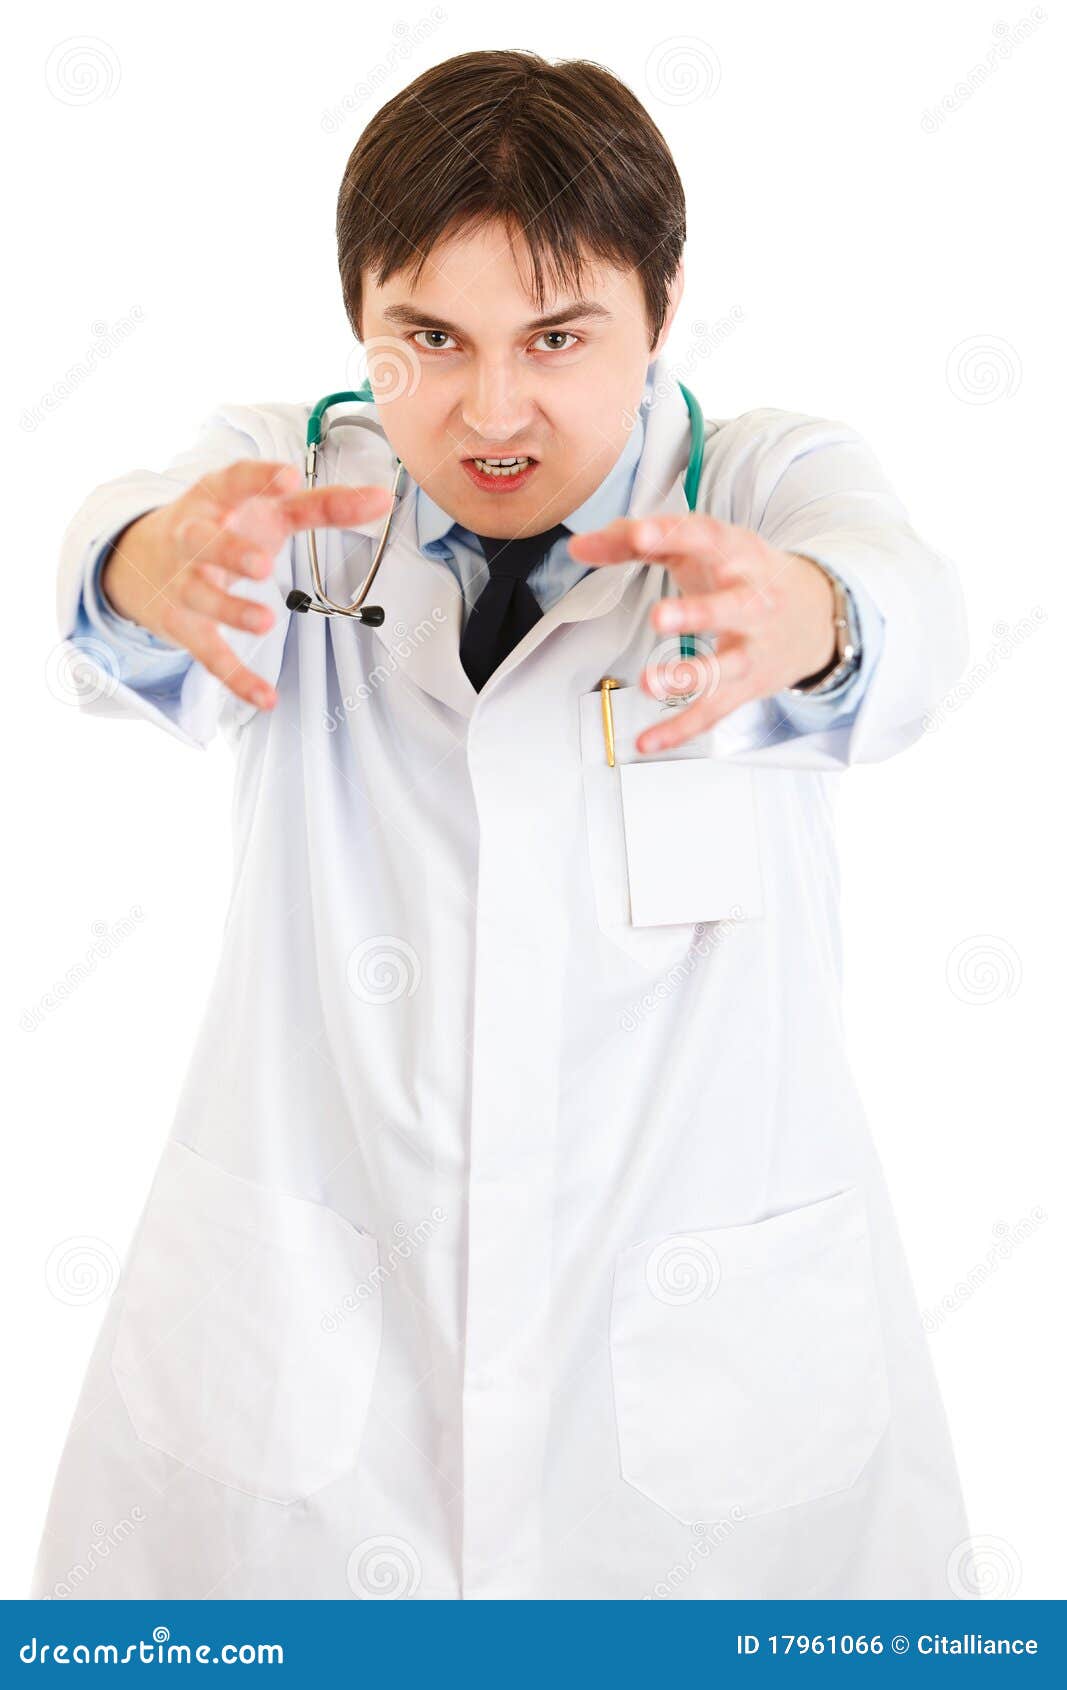 https://thumbs.dreamstime.com/z/angry-doctor-stethoscope-wants-to-catch-you-17961066.jpg